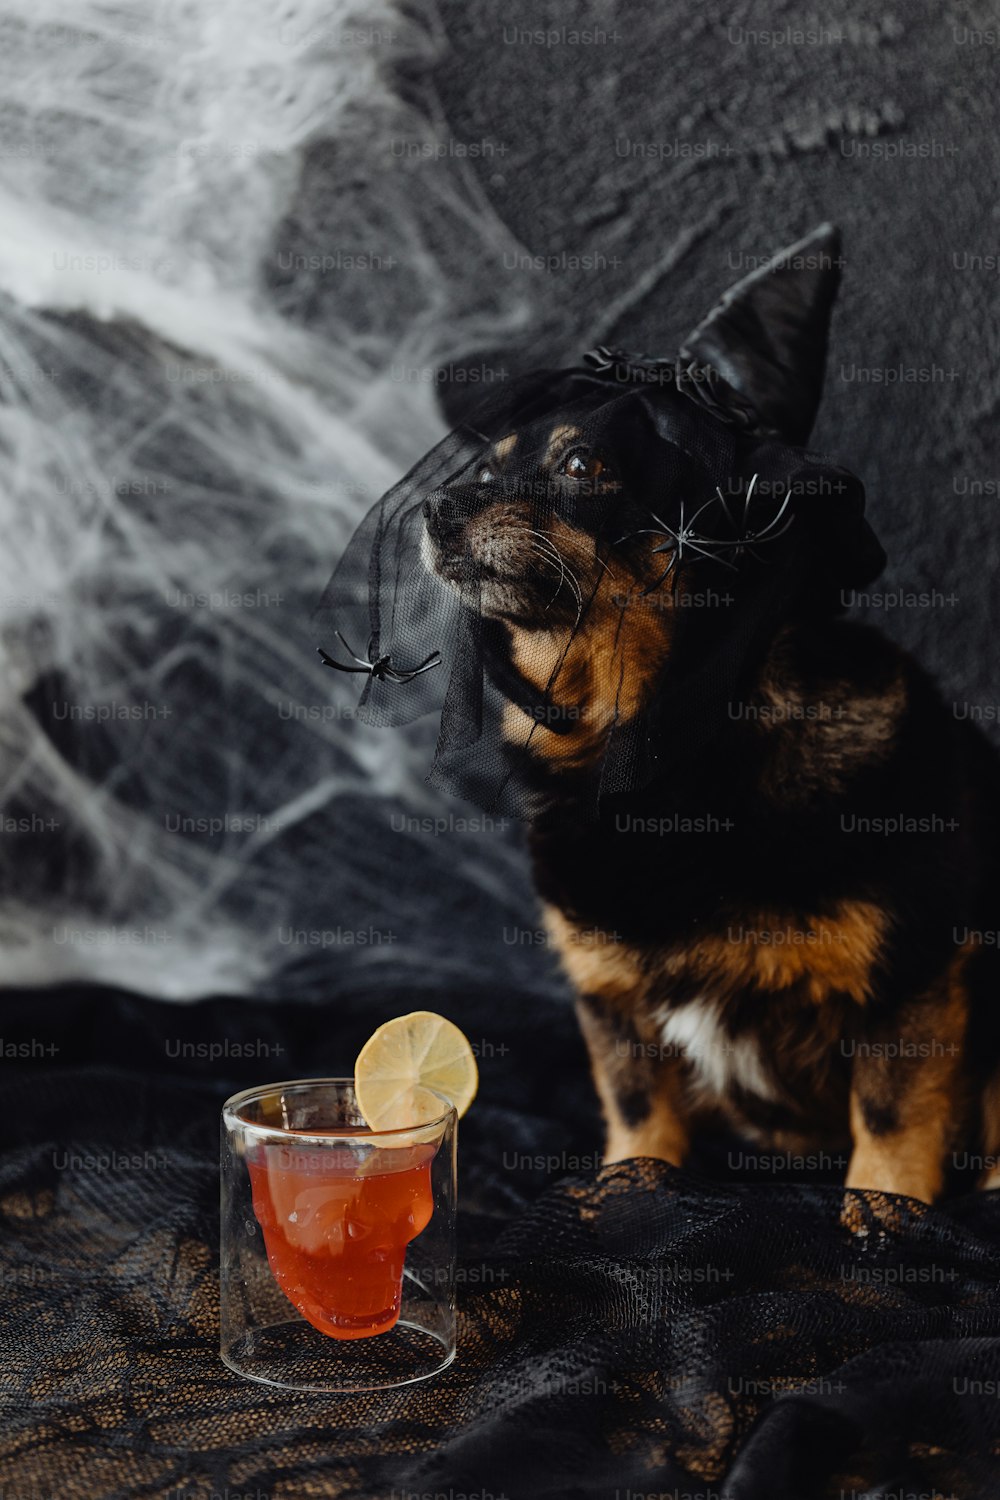 a small dog sitting next to a glass with a drink in it